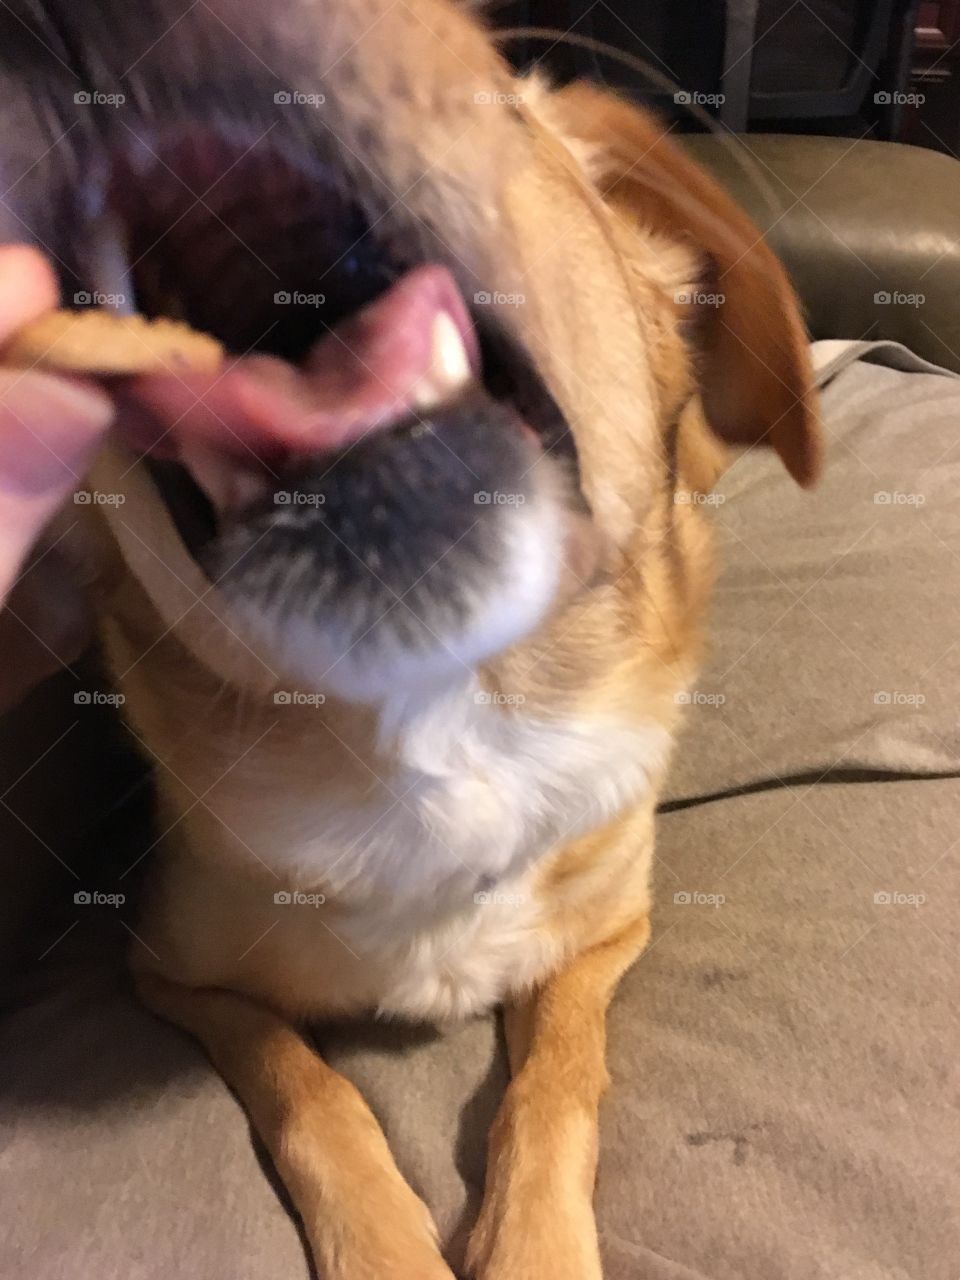 Dog mouth getting a cookie snack...yum!